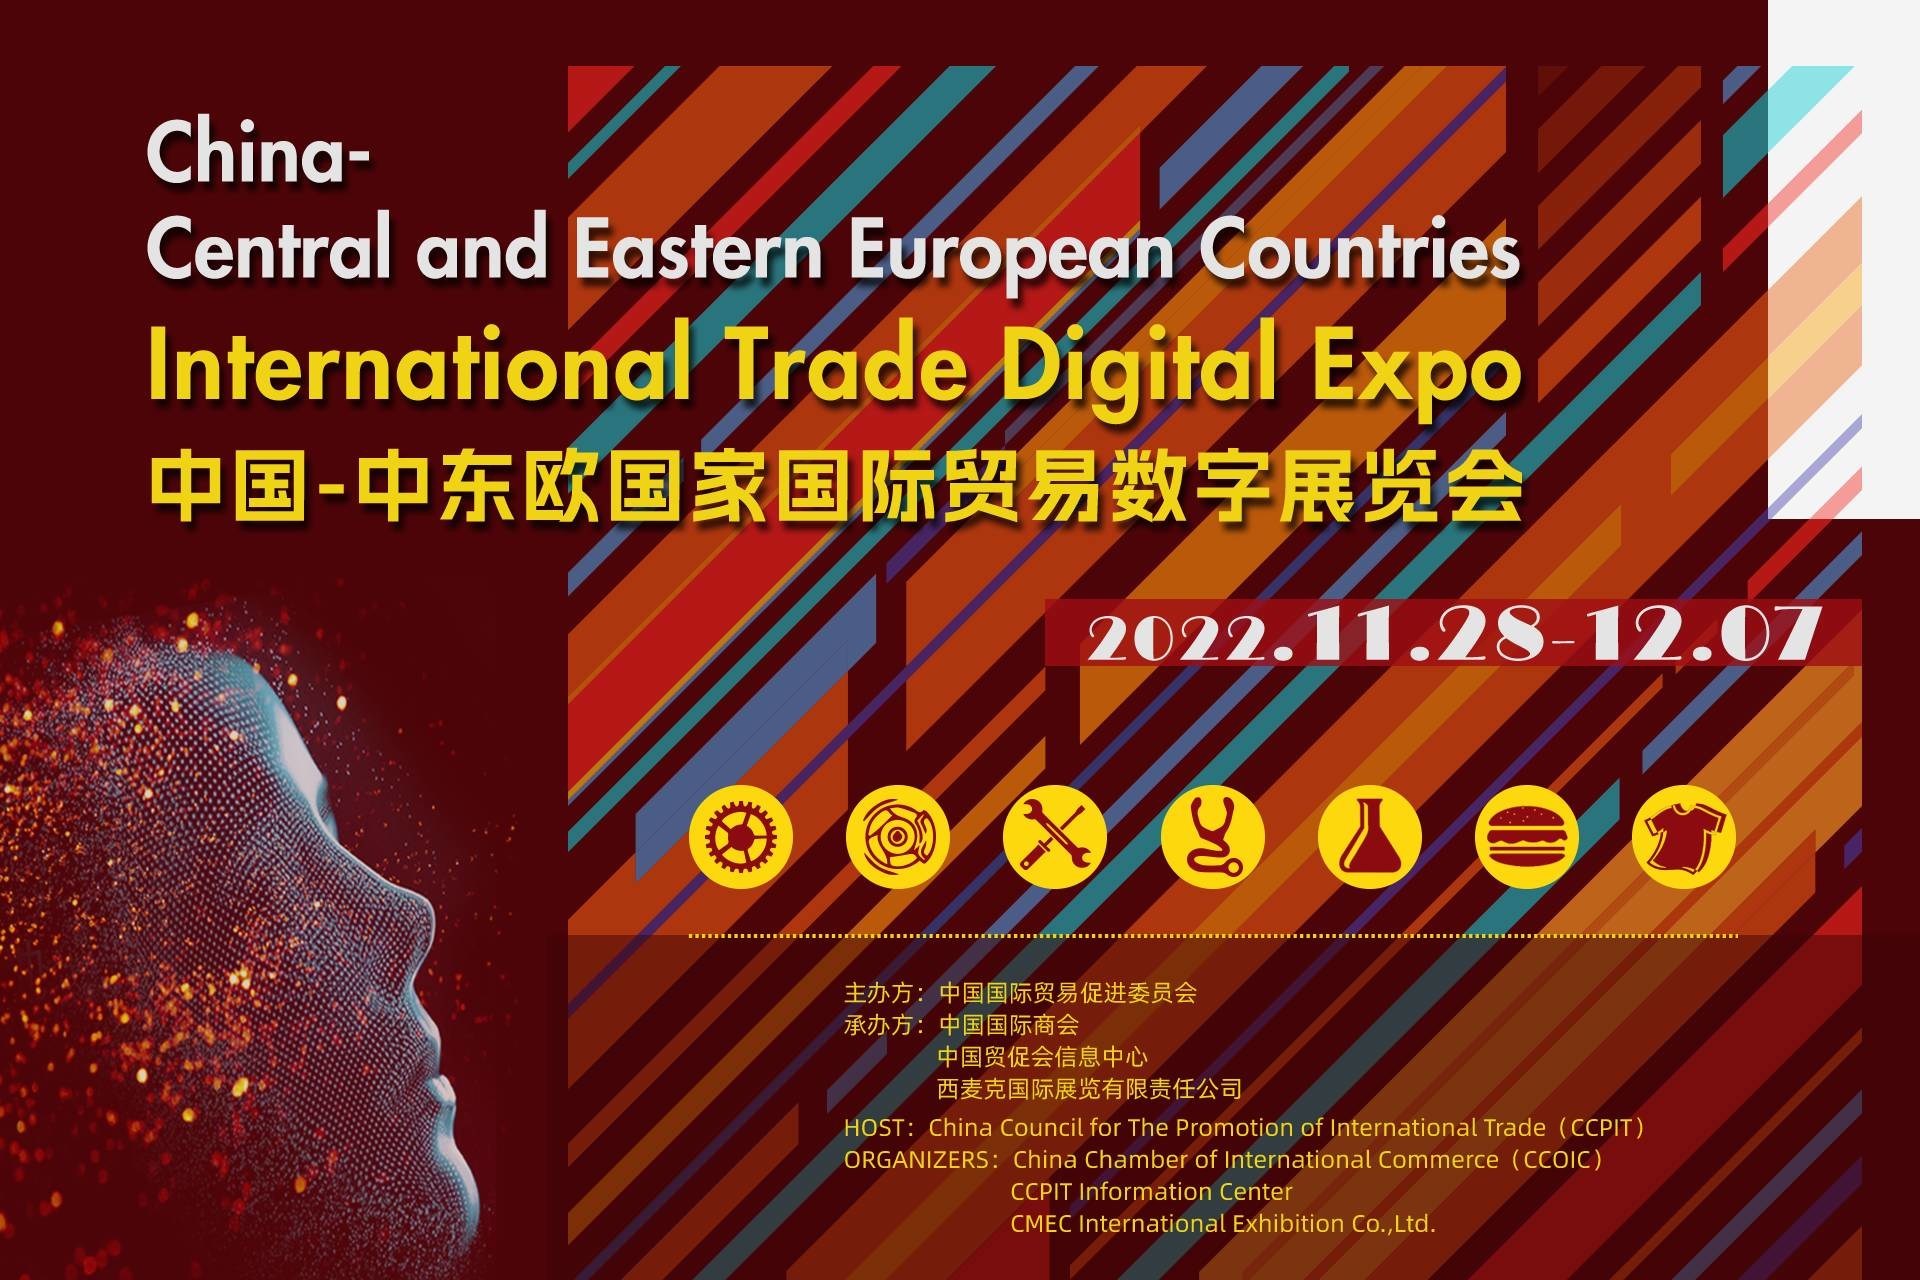 Upcoming China-Central and Eastern European Countries International Trade Digital Expo shows China's effort in promoting international trade